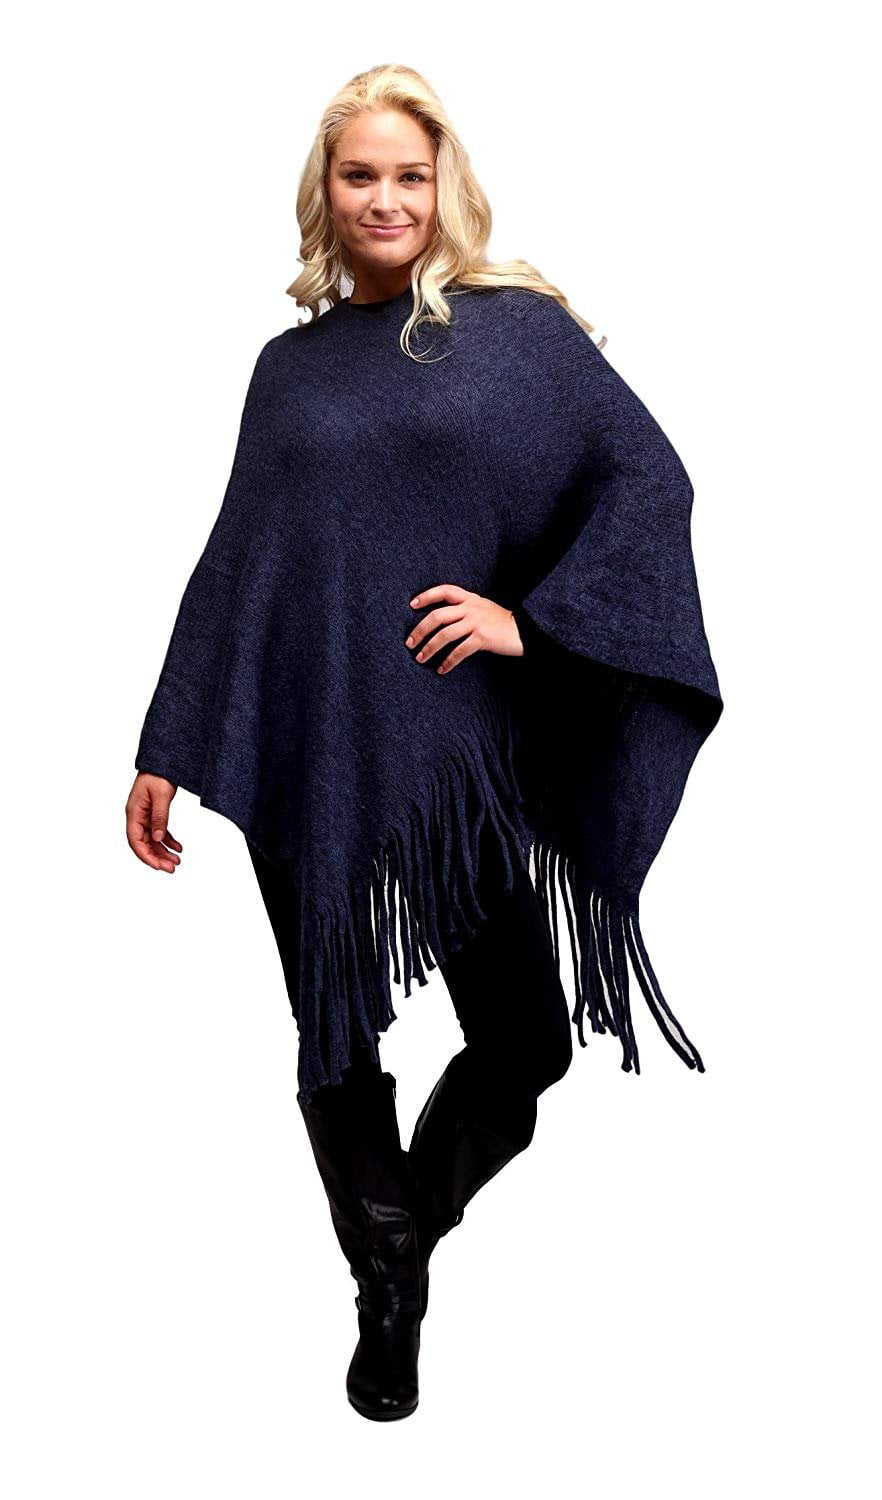 Solid Color Sweater Poncho Shrug with Fringe for Women Navy Blue ...